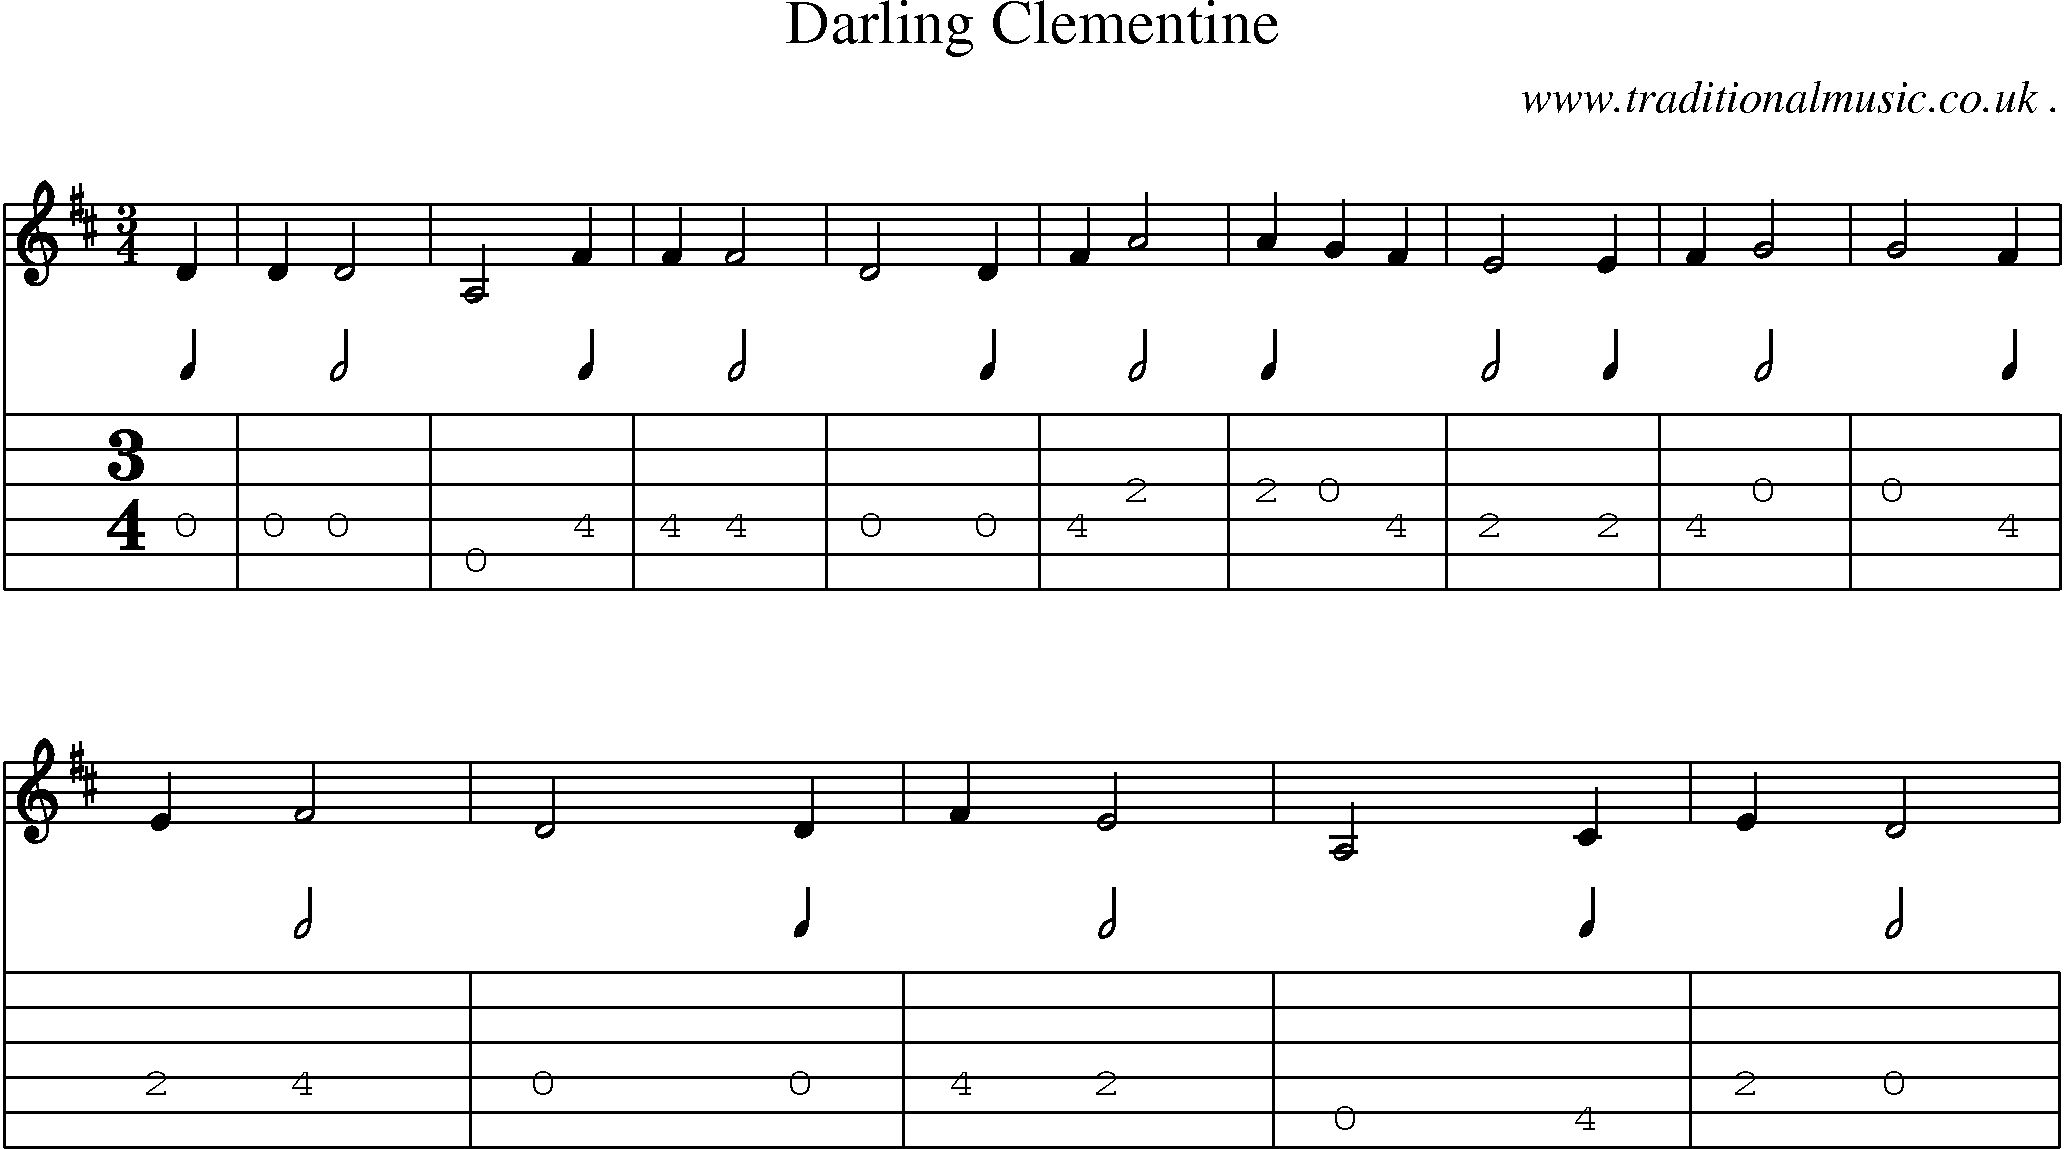 Music Score and Guitar Tabs for Darling Clementine